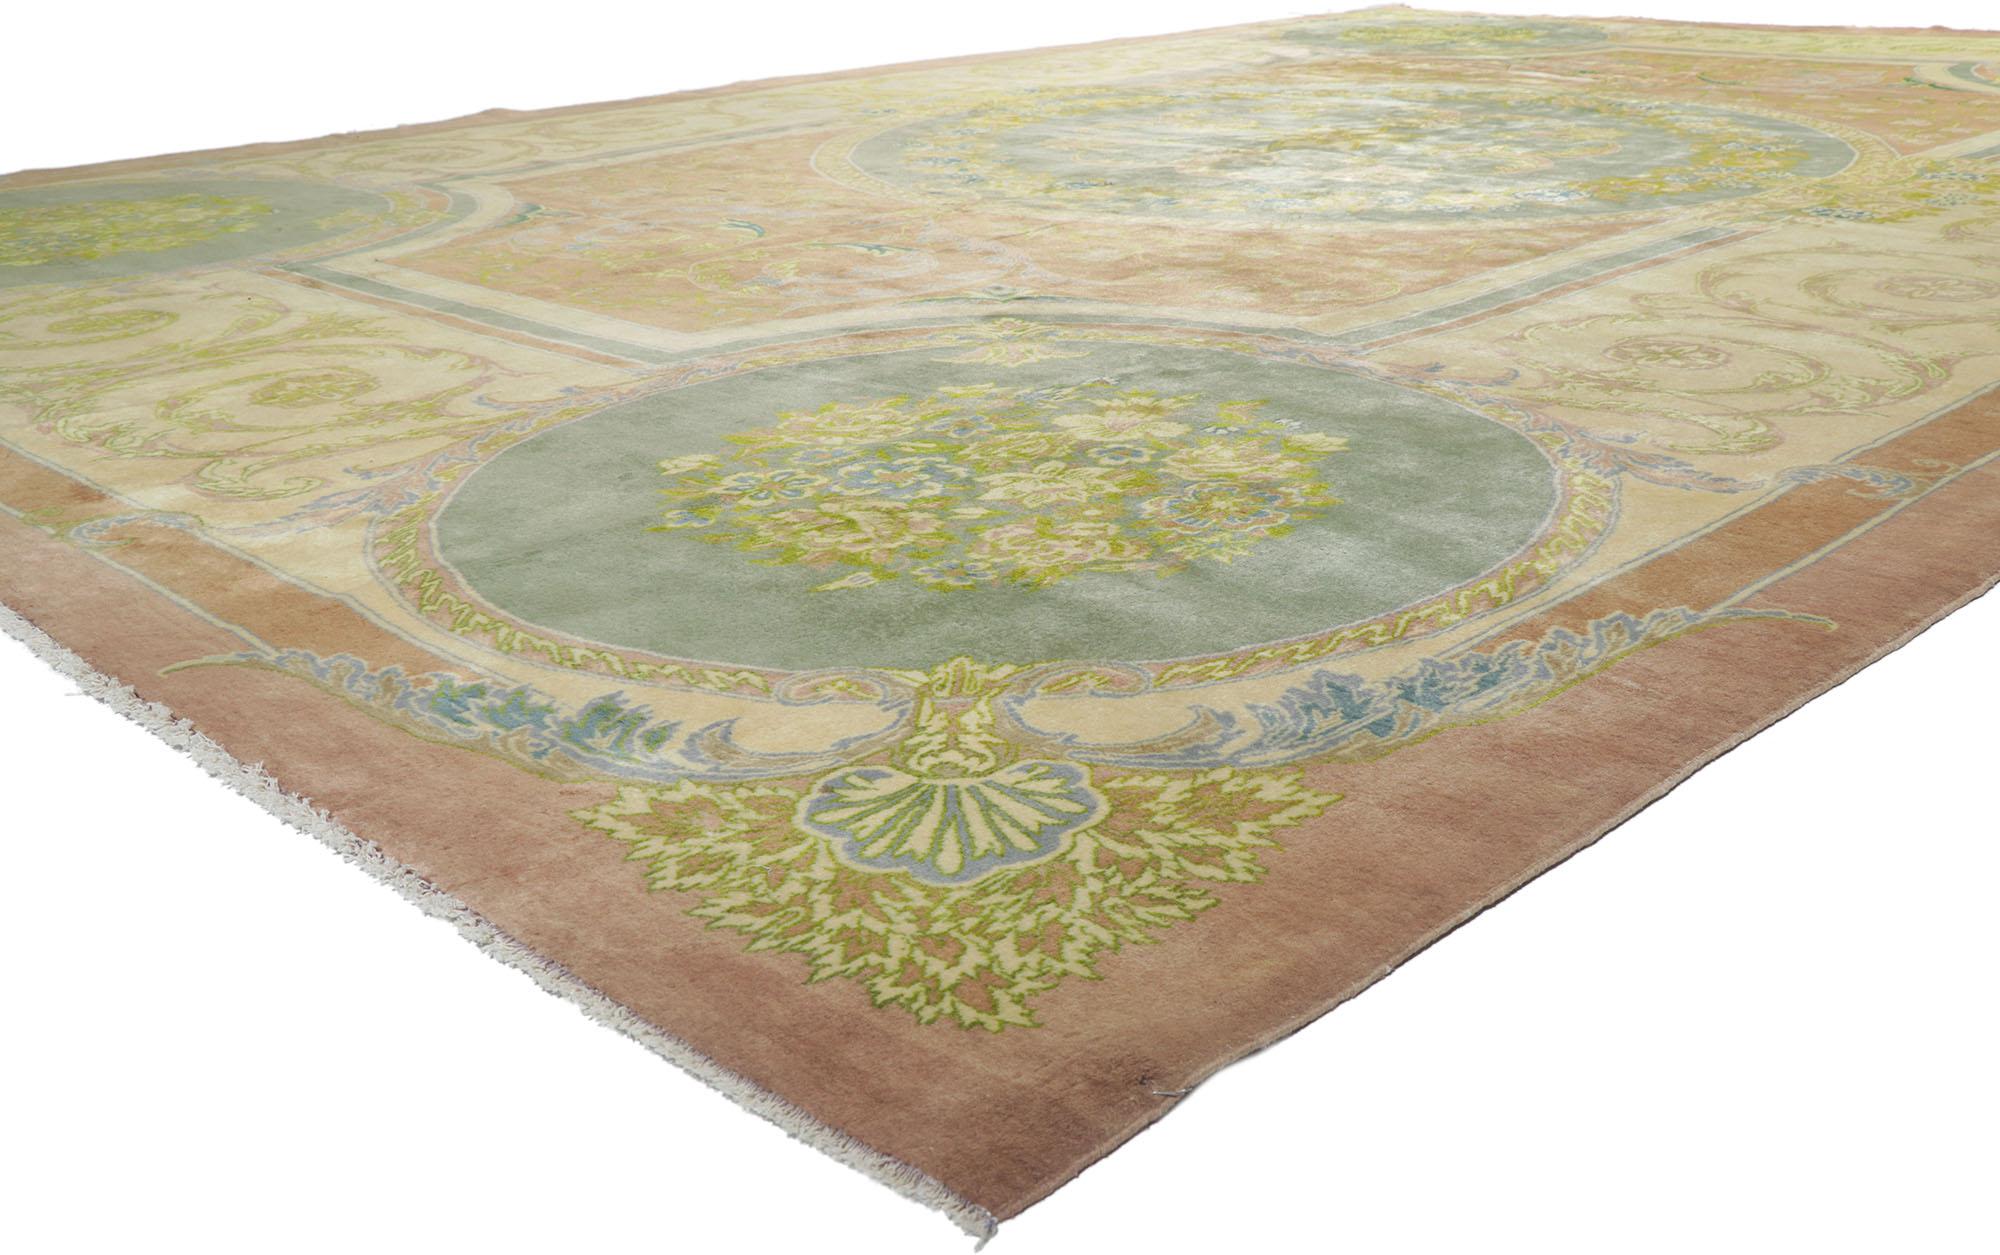 61025 vintage Persian Isfahan rug with French Romanticism and Louis XIV Style 13'04 x 19'09. Ornate details and effortless beauty with romantic connotations, this hand-knotted wool vintage Persian Isfahan rug is poised to impress. Taking center